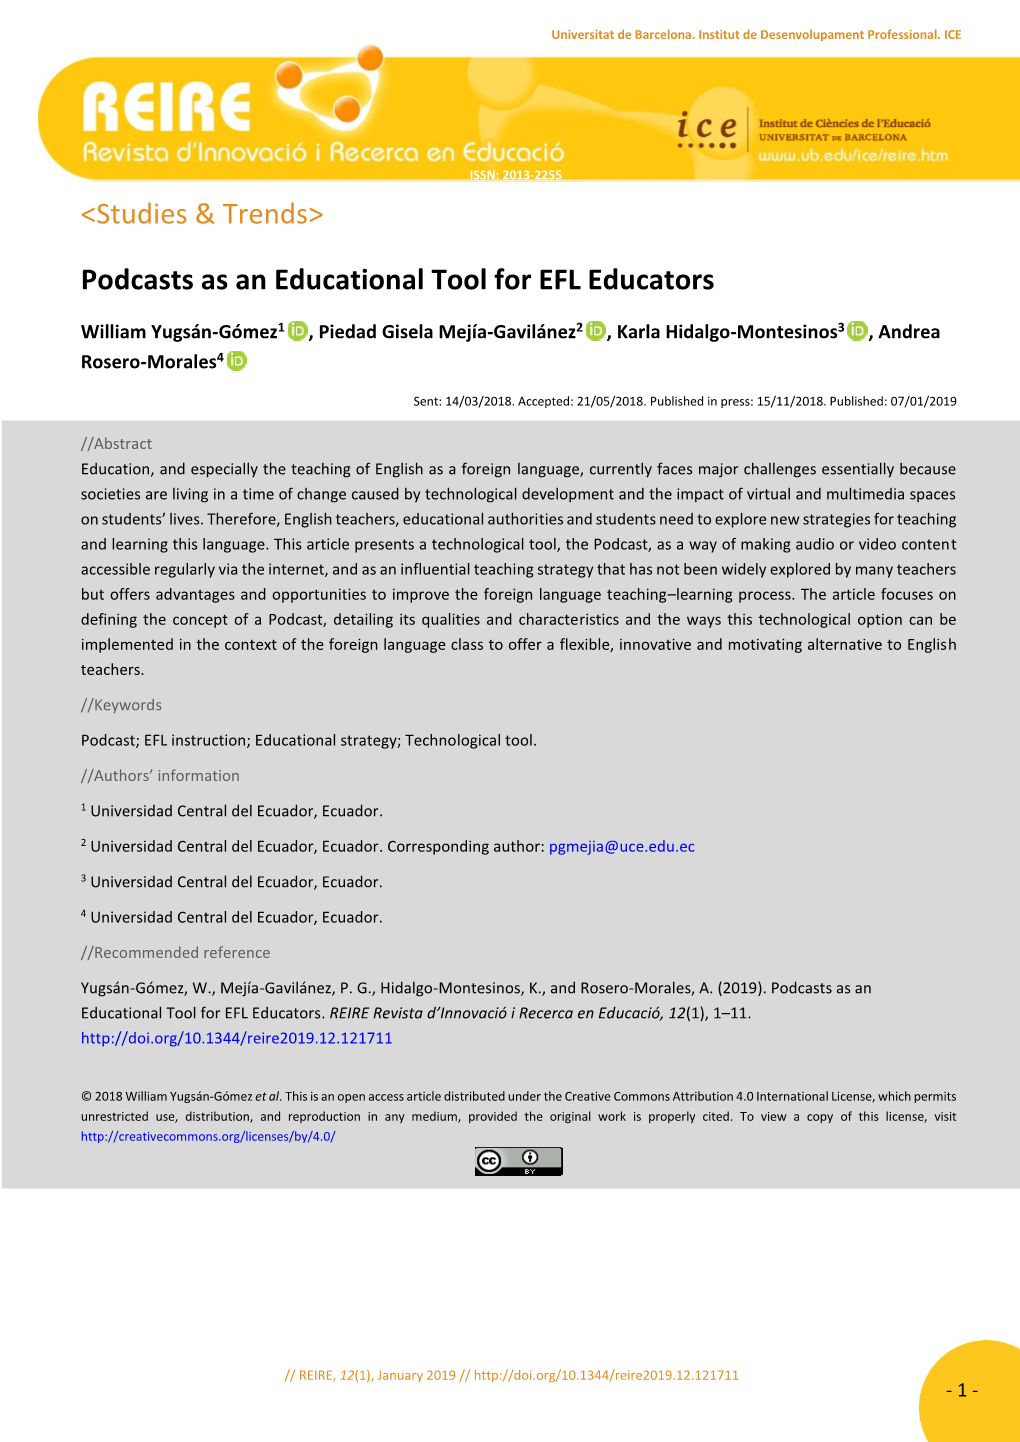 Podcasts As an Educational Tool for EFL Educators